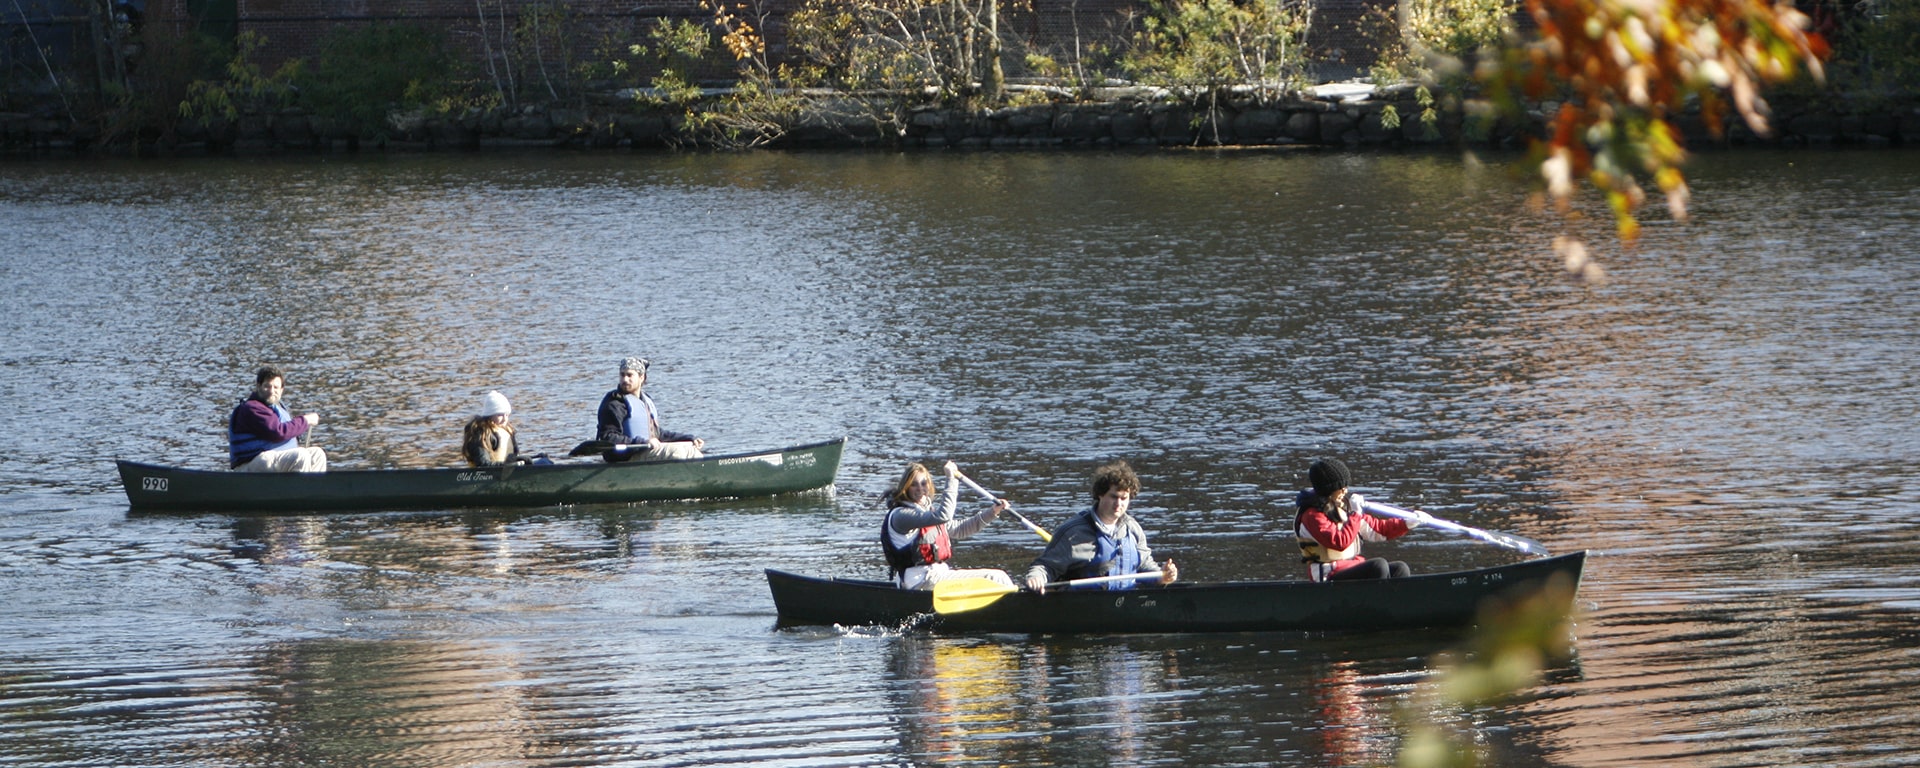 Students canoeing on the Charles River